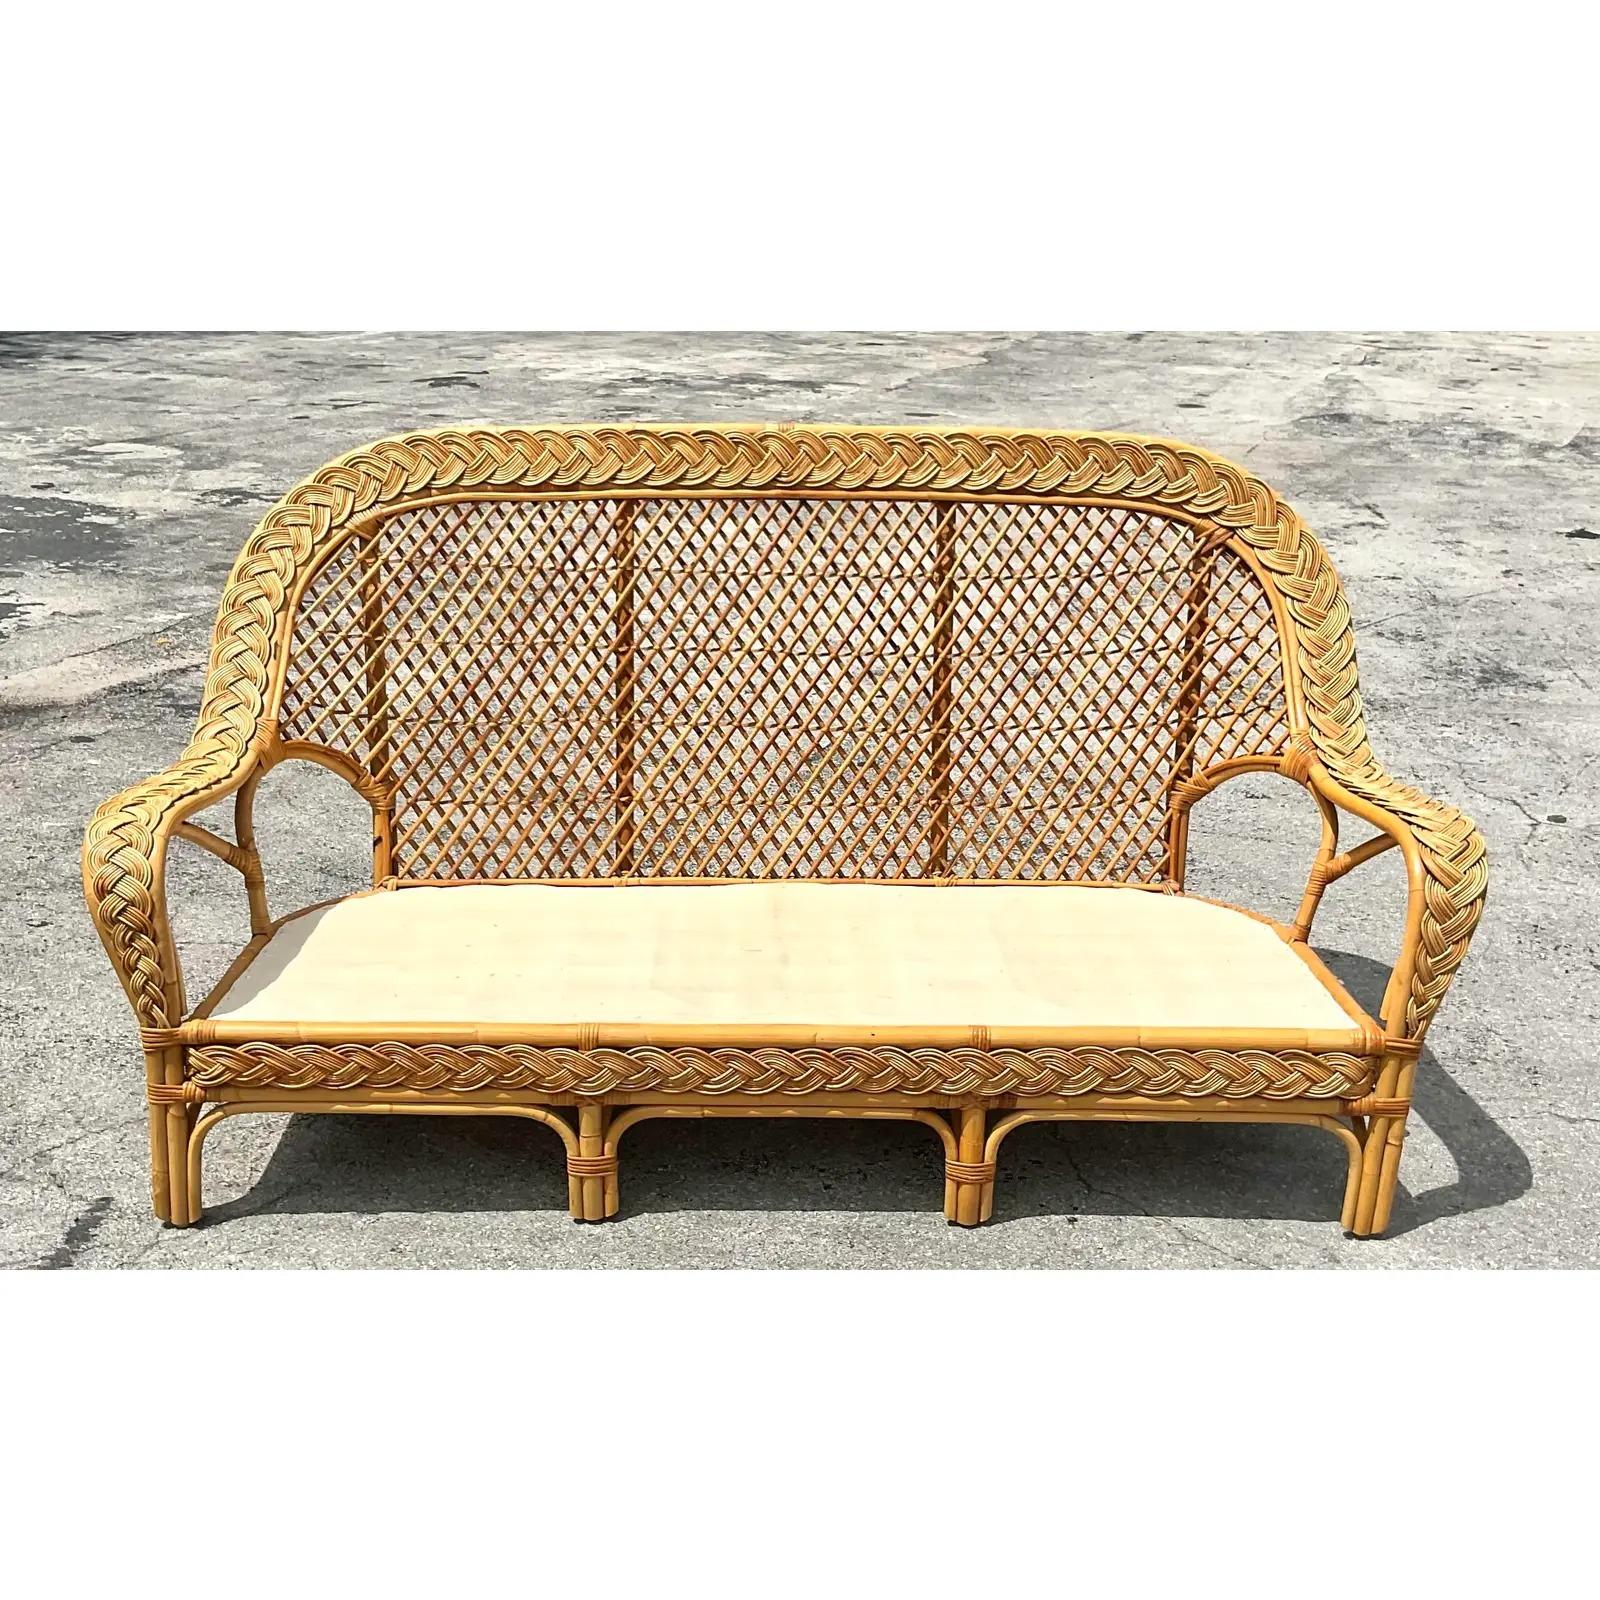 Fantastic vintage Coastal woven rattan sofa. Beautiful braided trim with a high paddle back. Matching loveseat and chairs also available. Cushions included. Acquired from a Palm Beach estate.